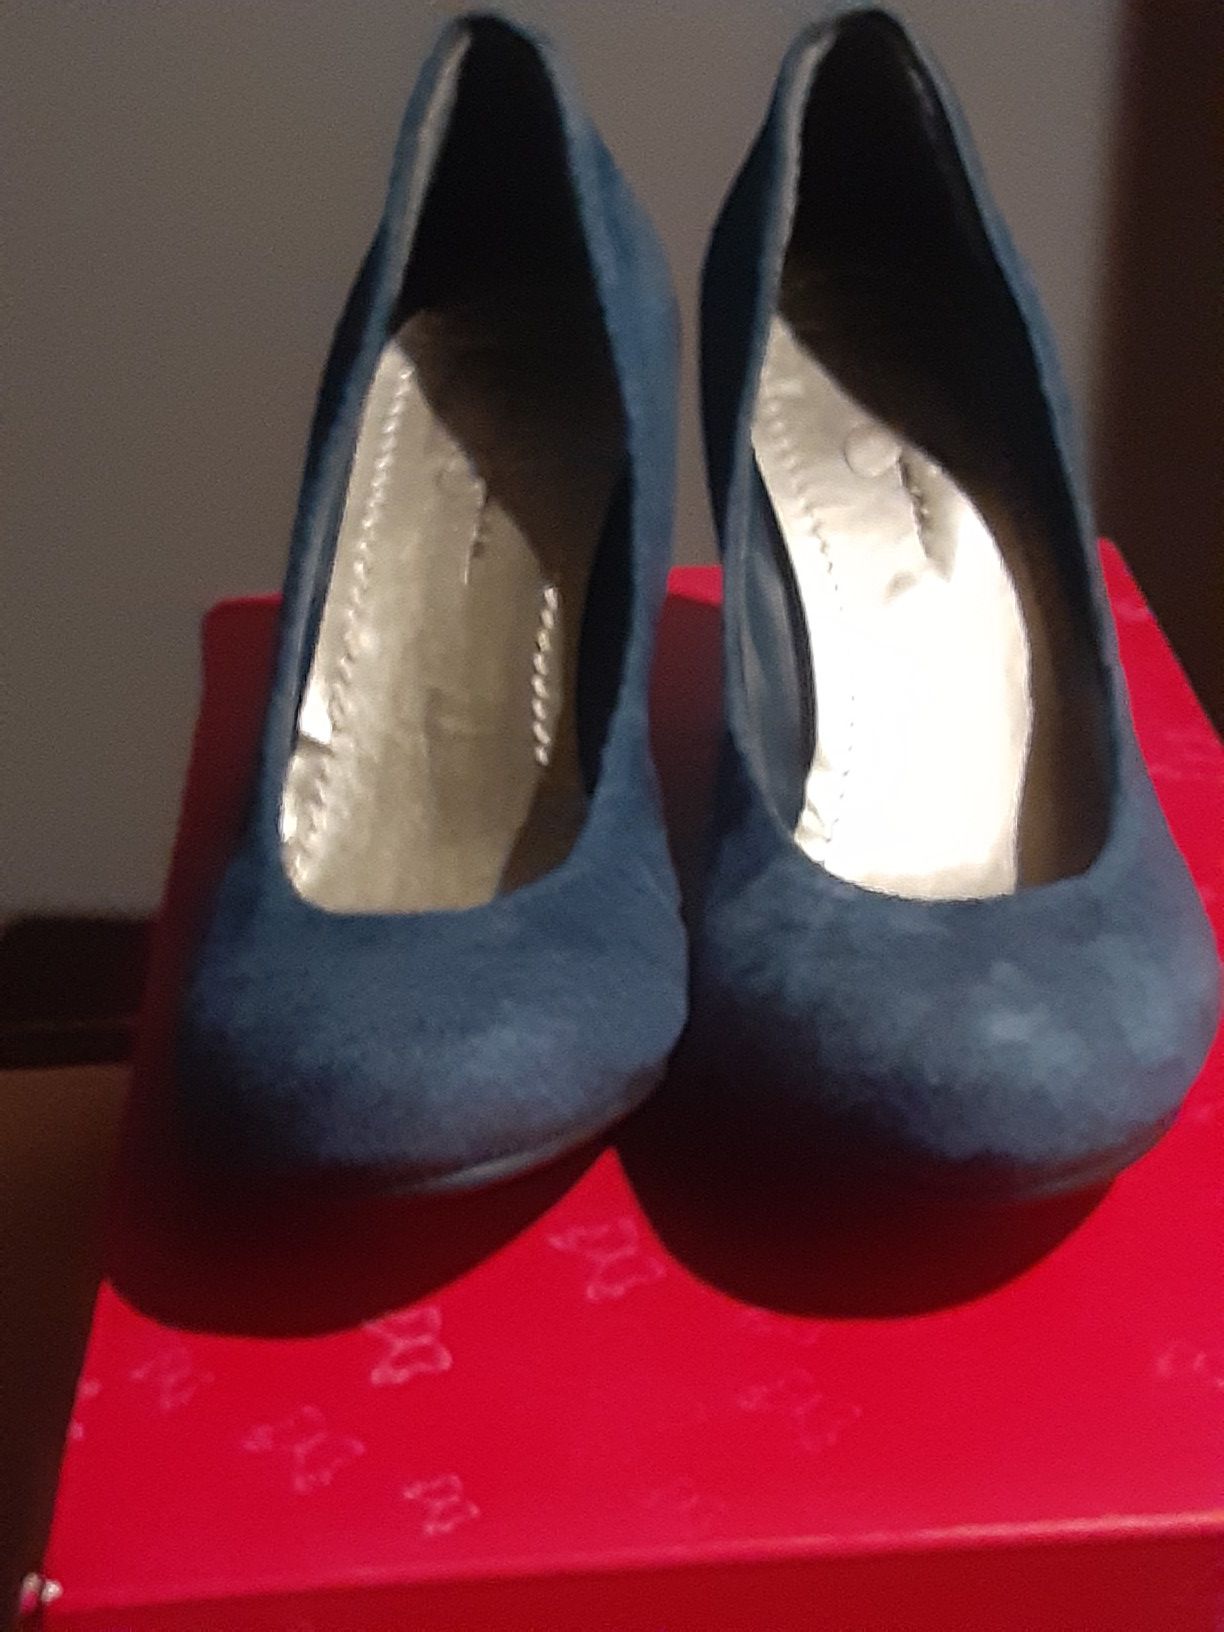 New, Never Worn Jessica Simpson Suede Blue wedge shoes; women's size 6.5 M (true to size)